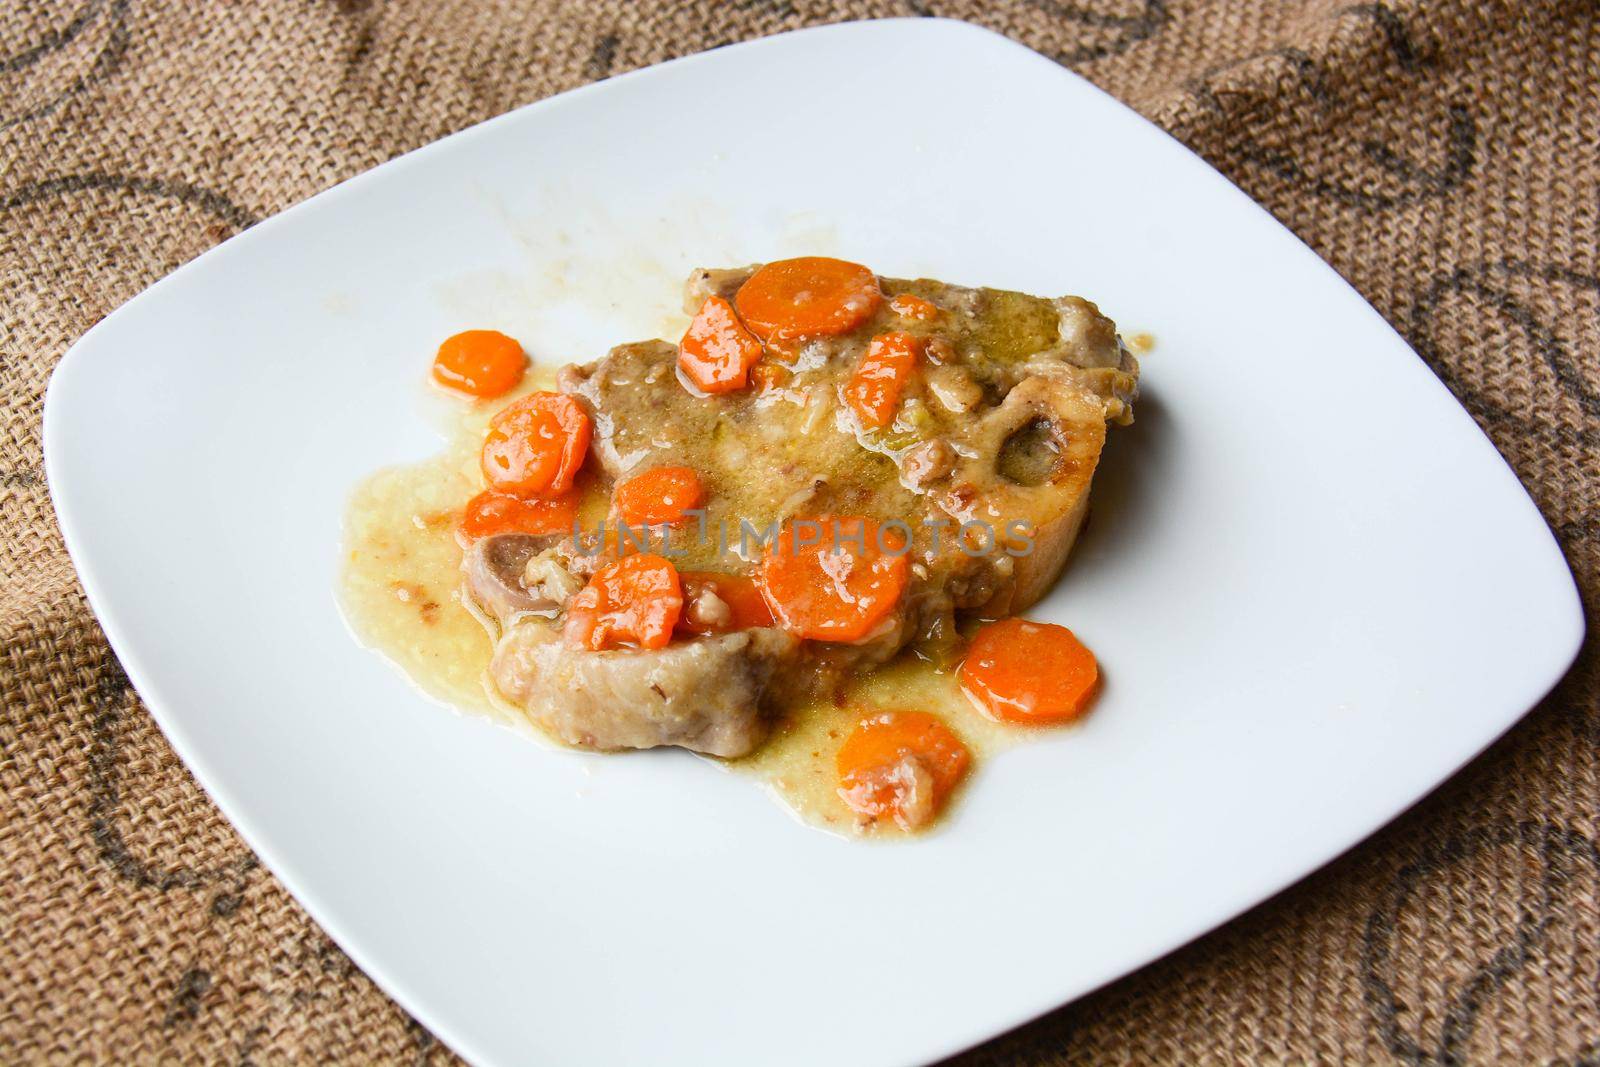 homemade marrowbone with the grandmother's recipe of carrots, celery, tomatoes and slow cooking